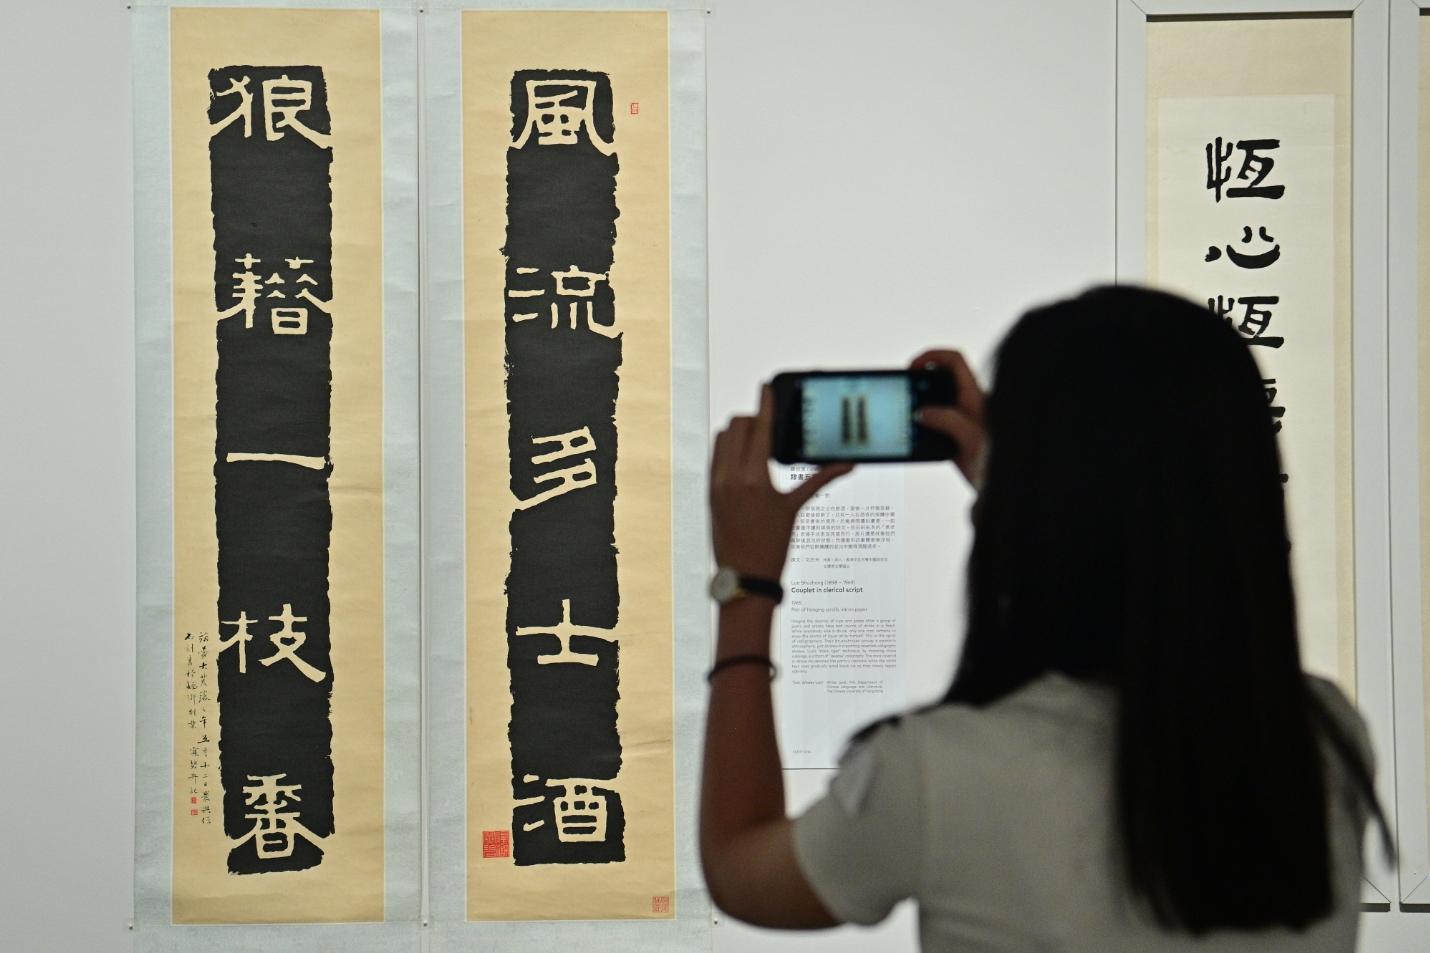 The "City Rhymes: The Melodious Notes of Calligraphy" exhibition will be held from tomorrow (July 22) at the Hong Kong Museum of Art. Photo shows Luo Shuzhong's "Couplet in clerical script".